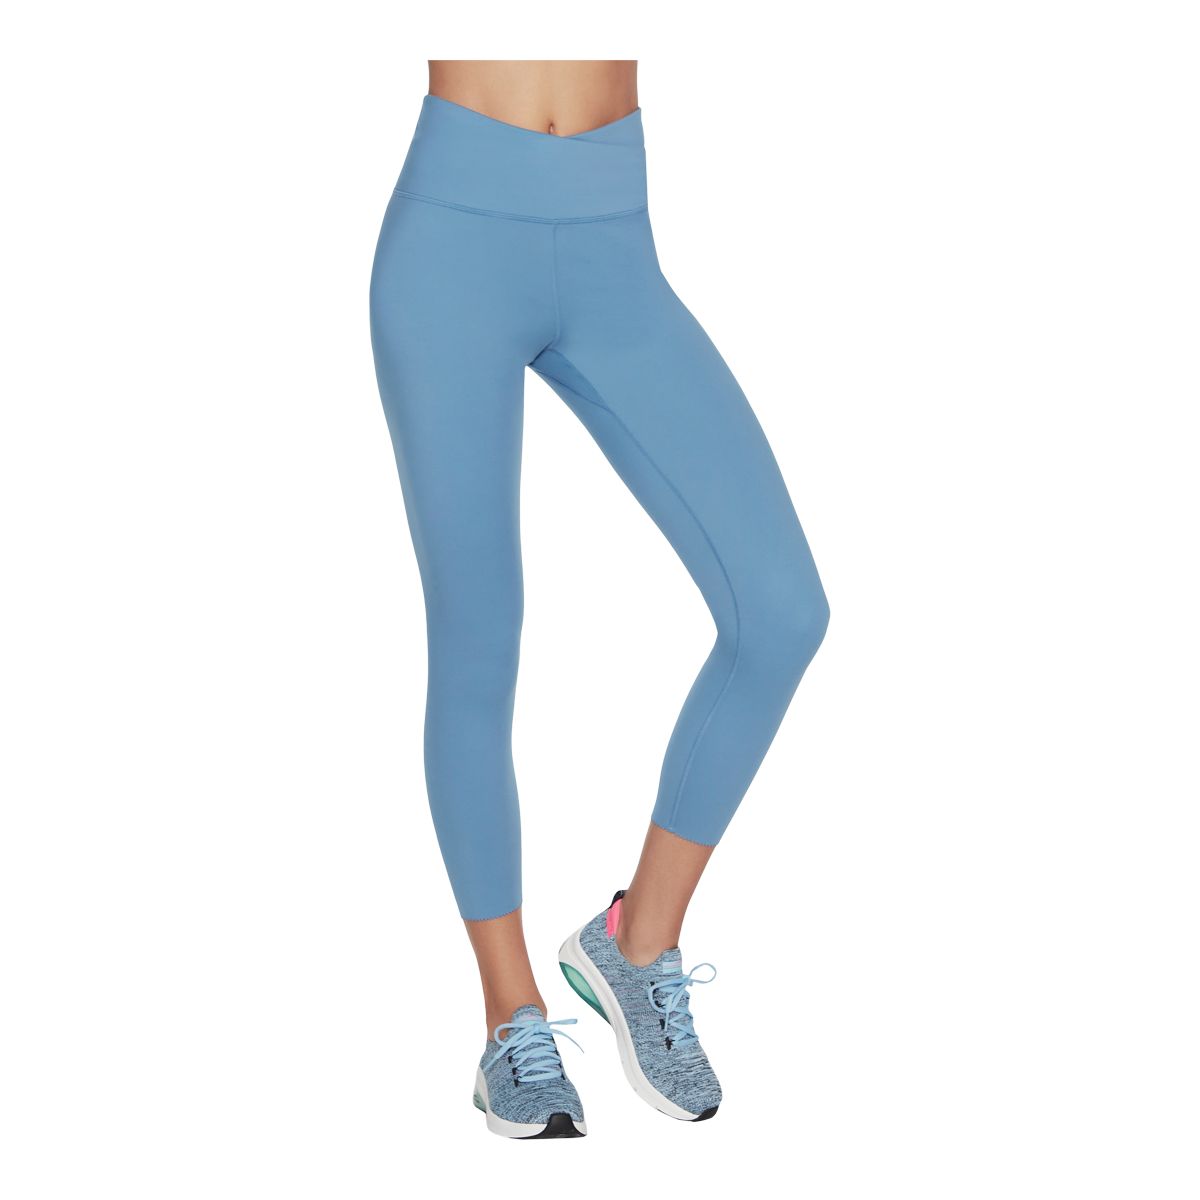 SKECHERS - Get up and going in stylish athletic comfort the #Skechers GOwalk™  Midnight Leopard 7/8 HW Legging 🐆🐆